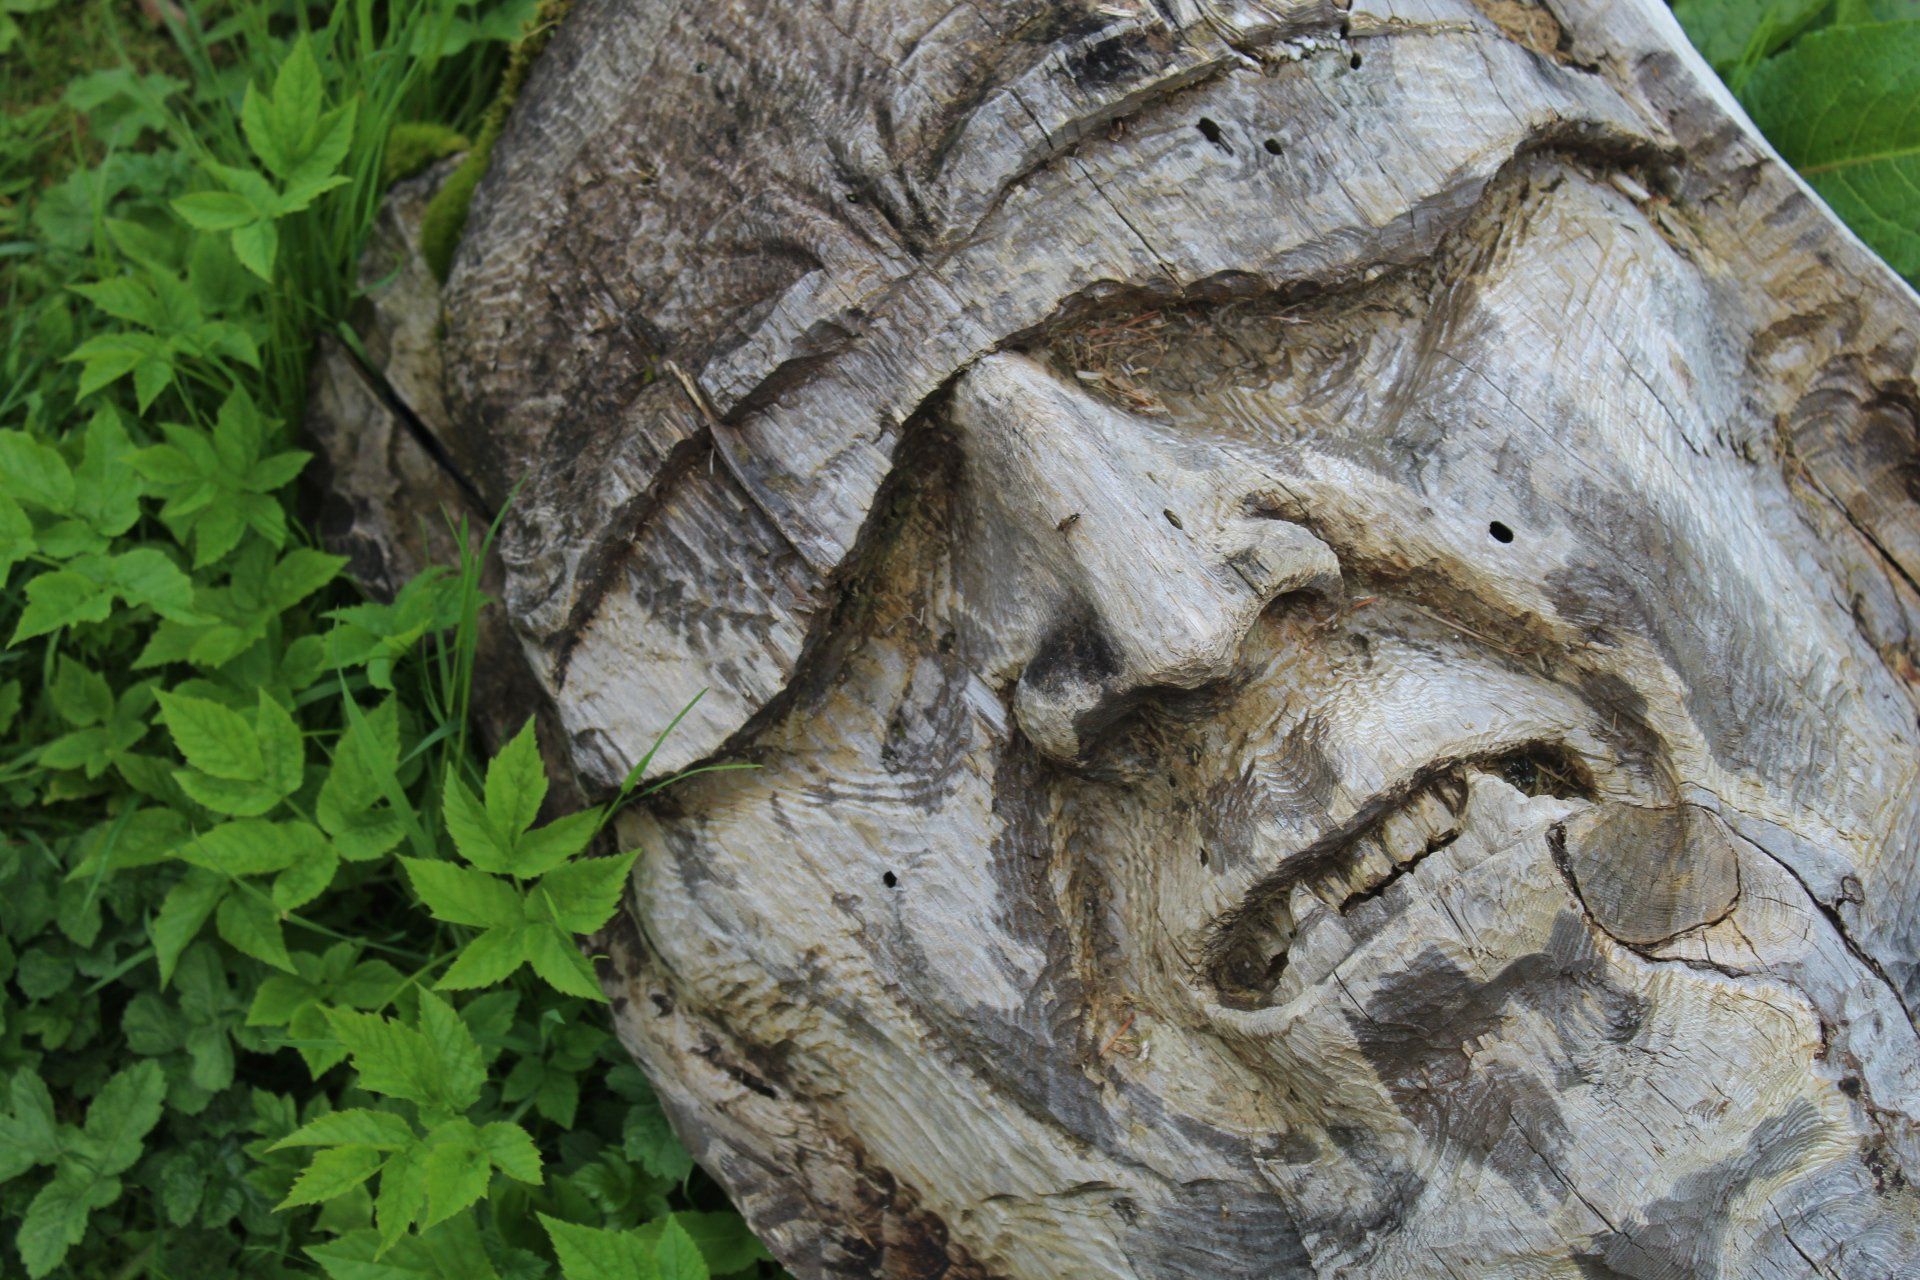 The anguish and torment is often clear to see on the faces of Frank Bruce's sculptures.